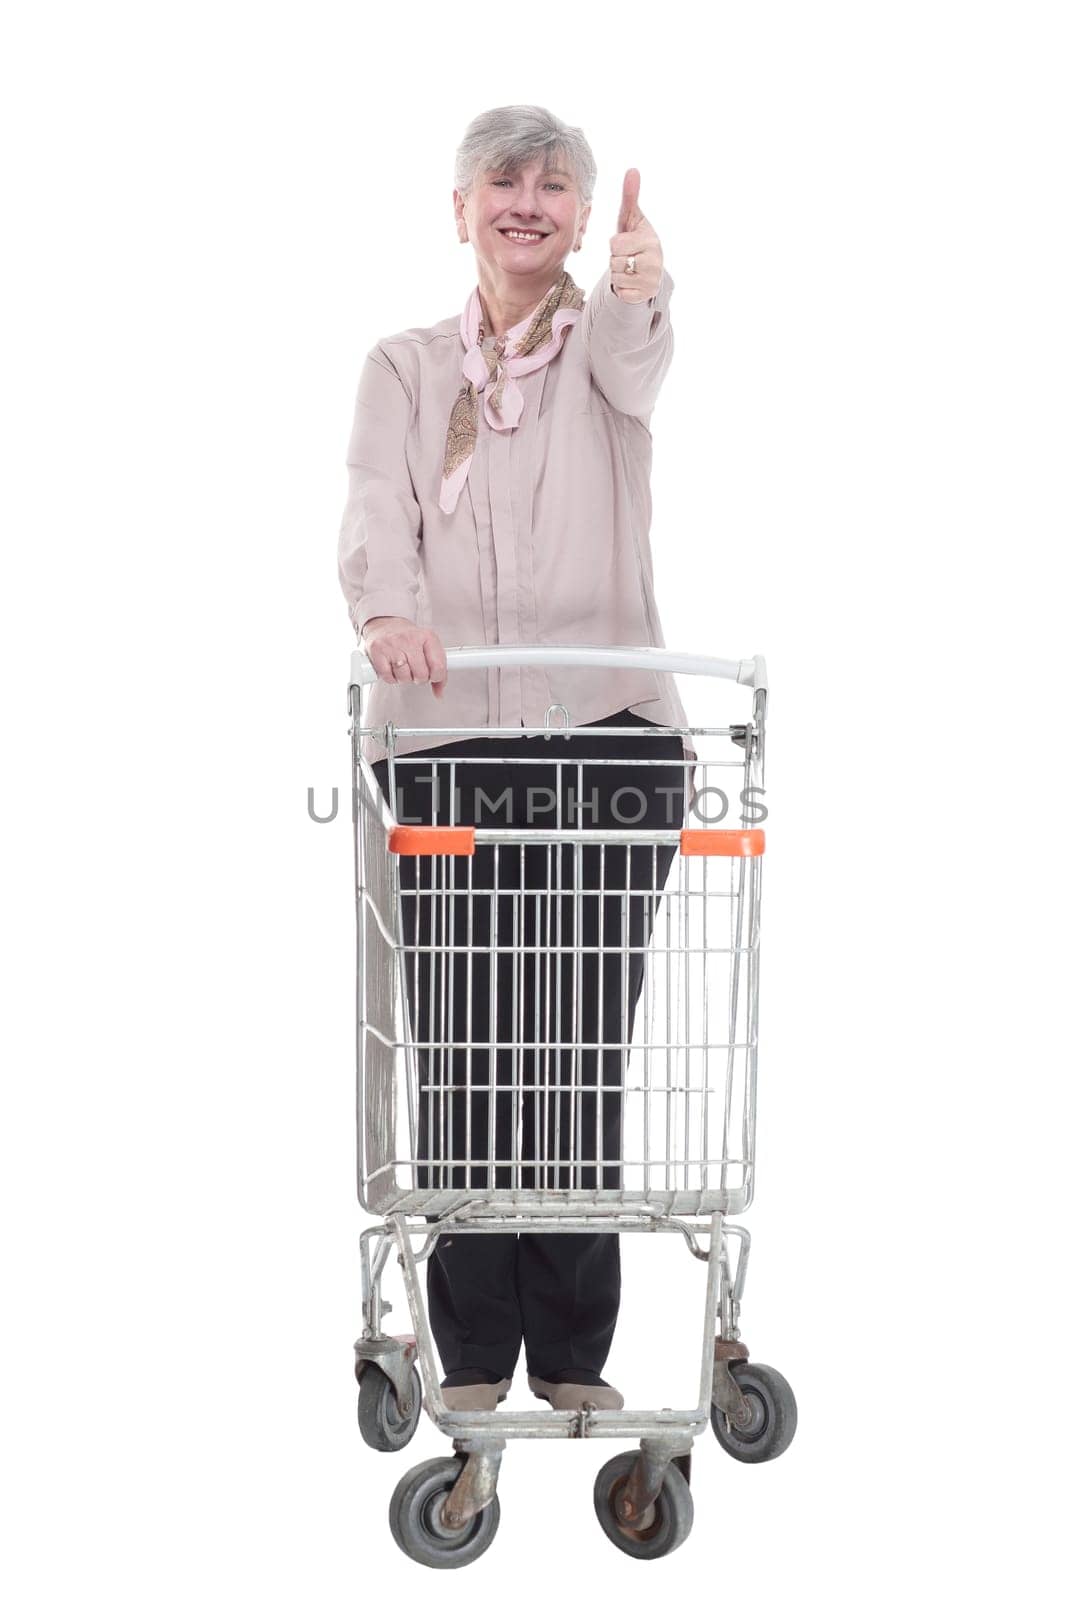 smiling old lady with a shopping cart . isolated on a white background. by asdf